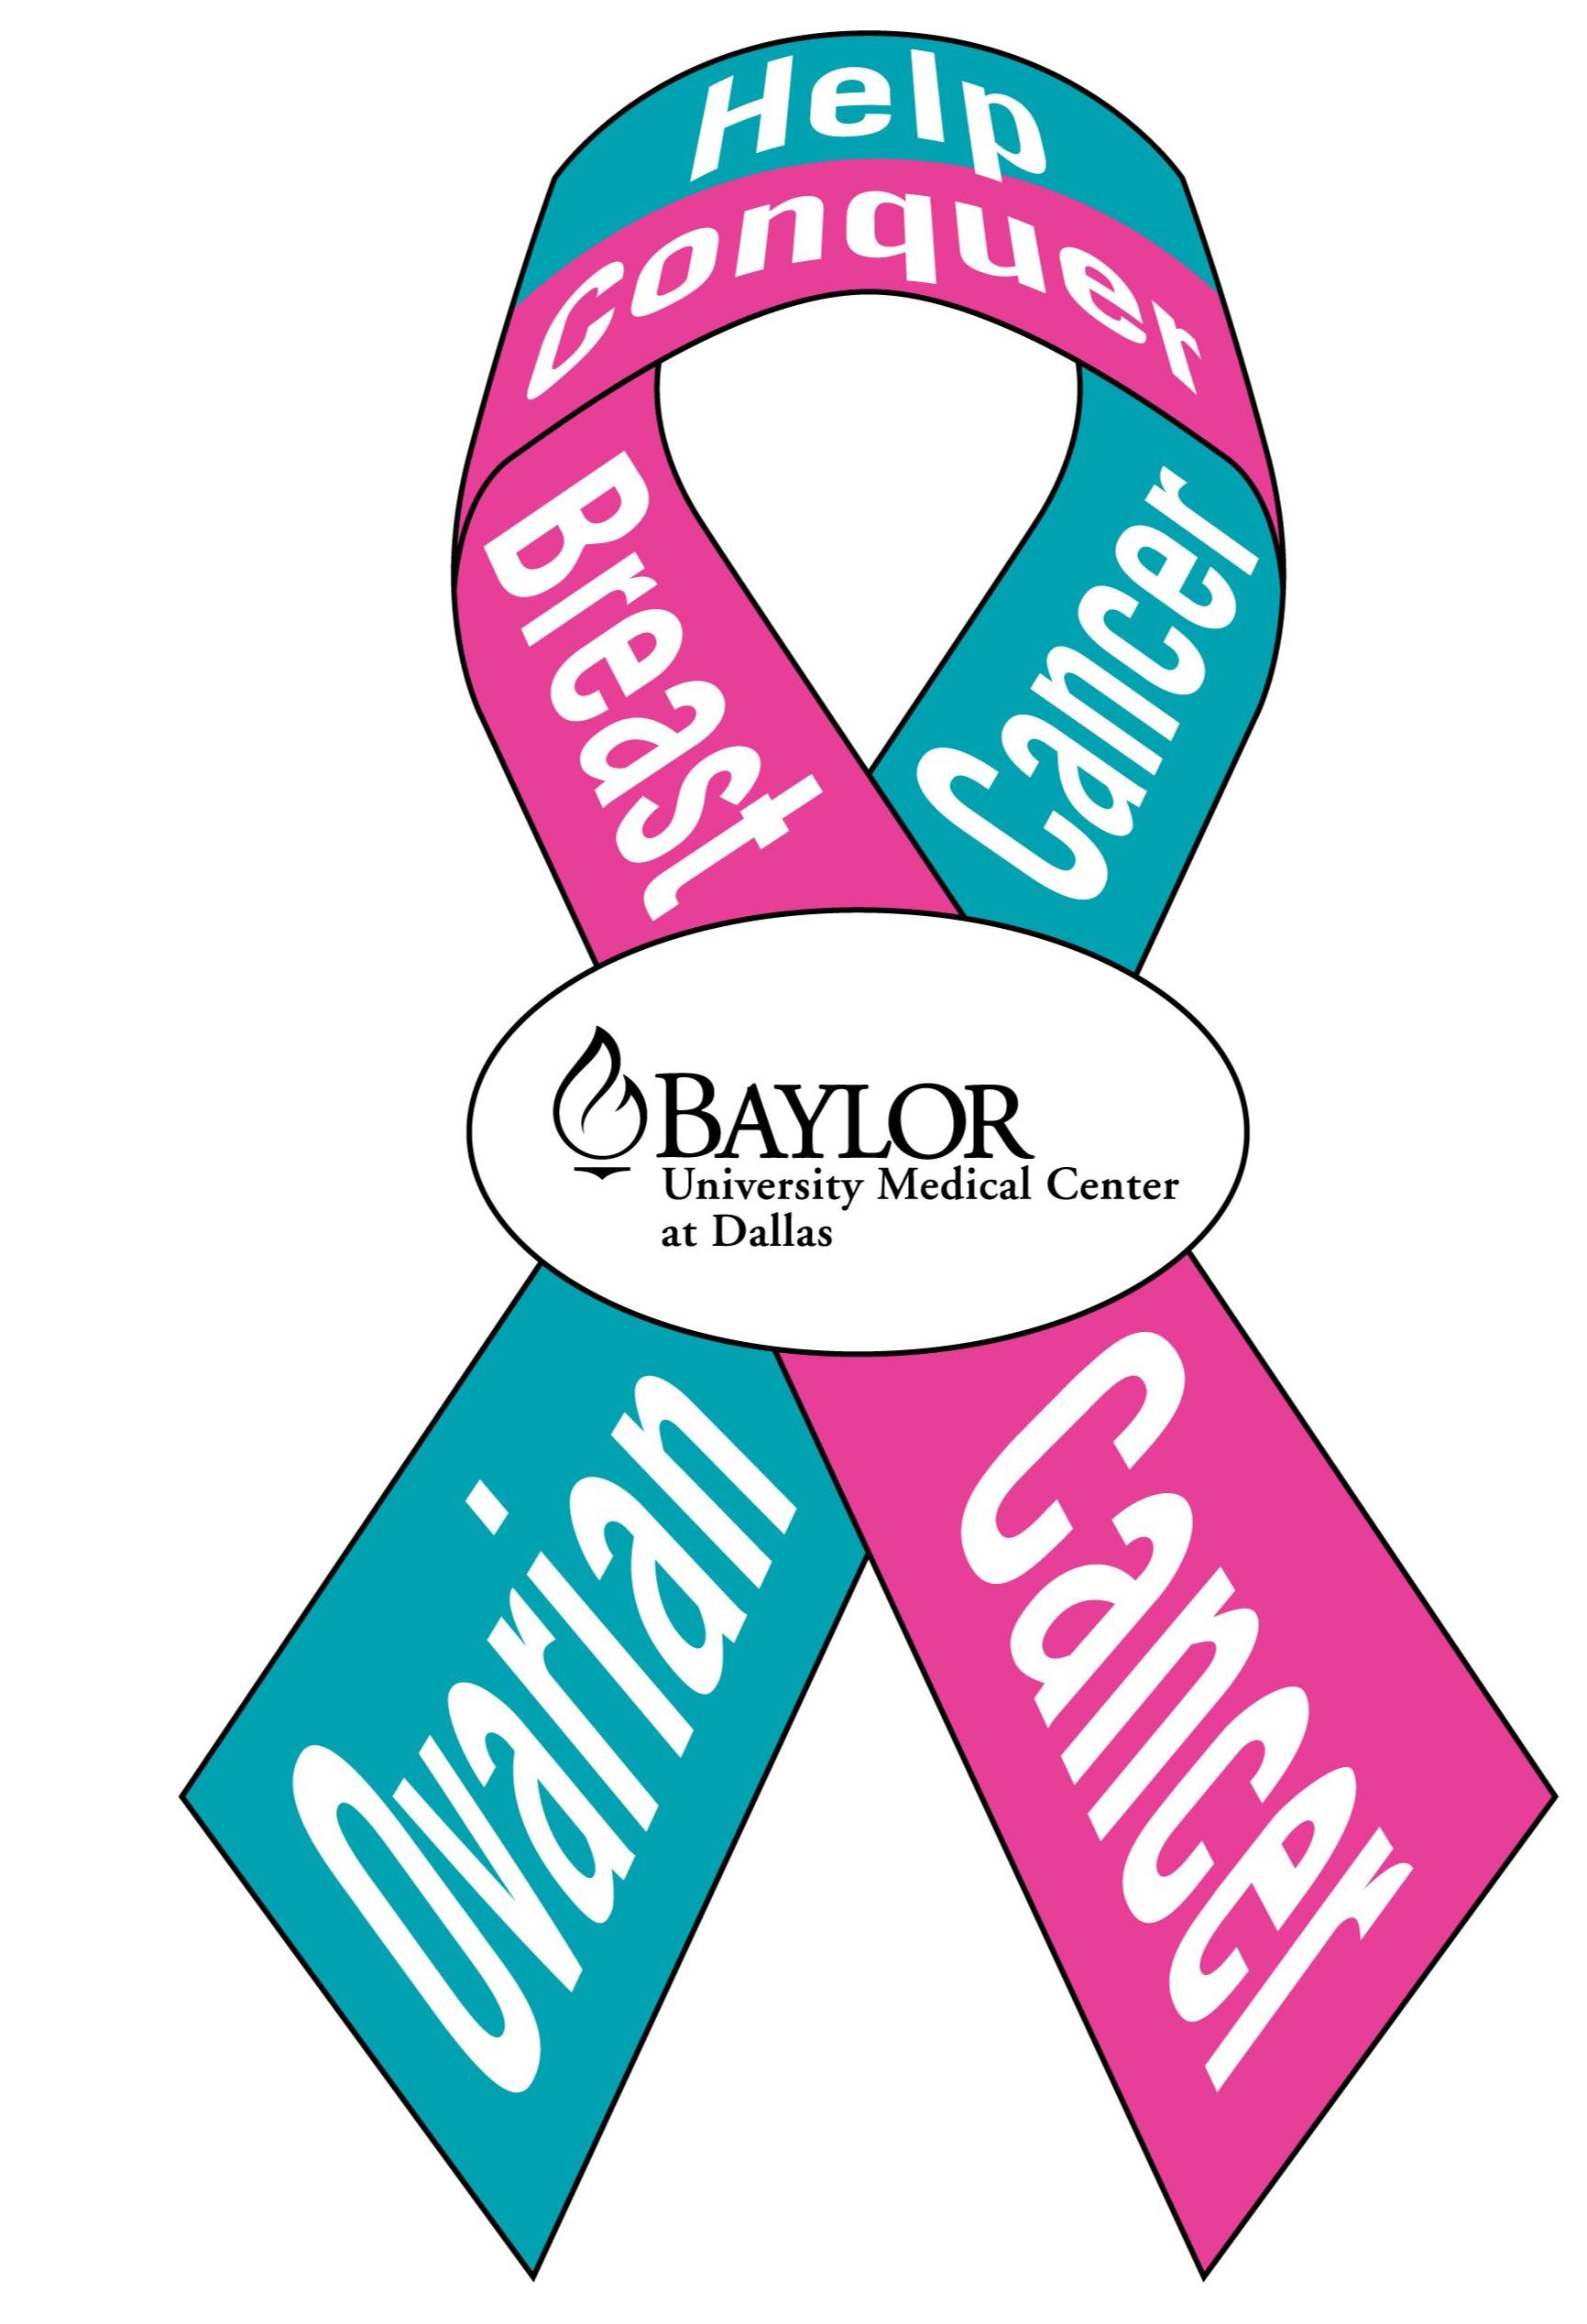  HELP CONQUER BREAST CANCER OVARIAN CANCER BAYLOR UNIVERSITY MEDICAL CENTER AT DALLAS